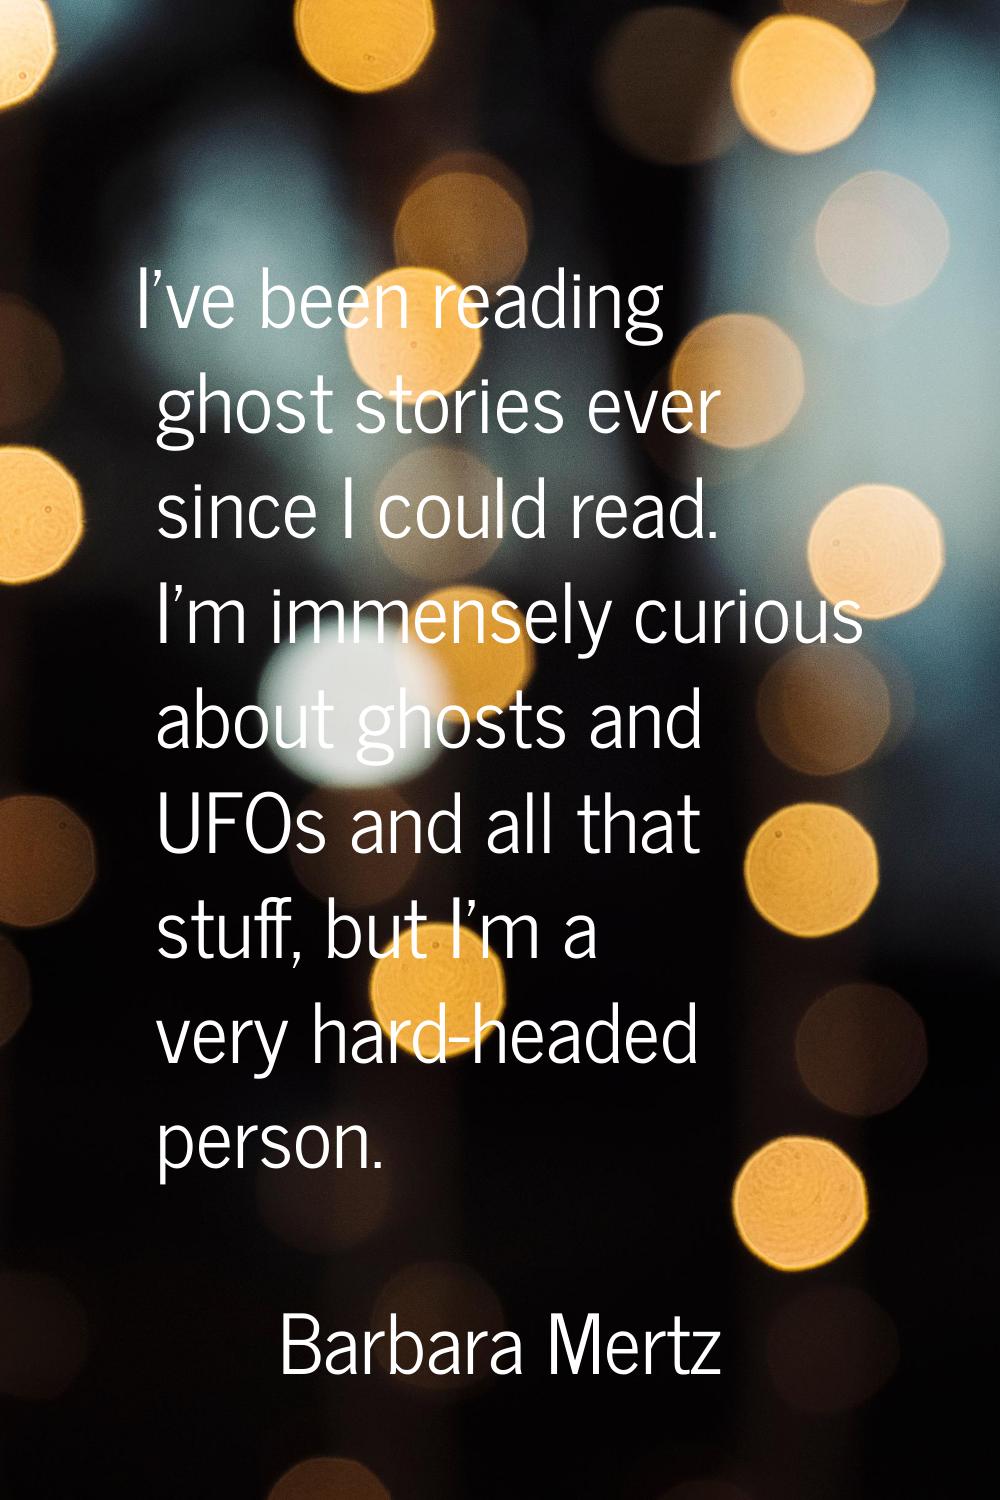 I've been reading ghost stories ever since I could read. I'm immensely curious about ghosts and UFO